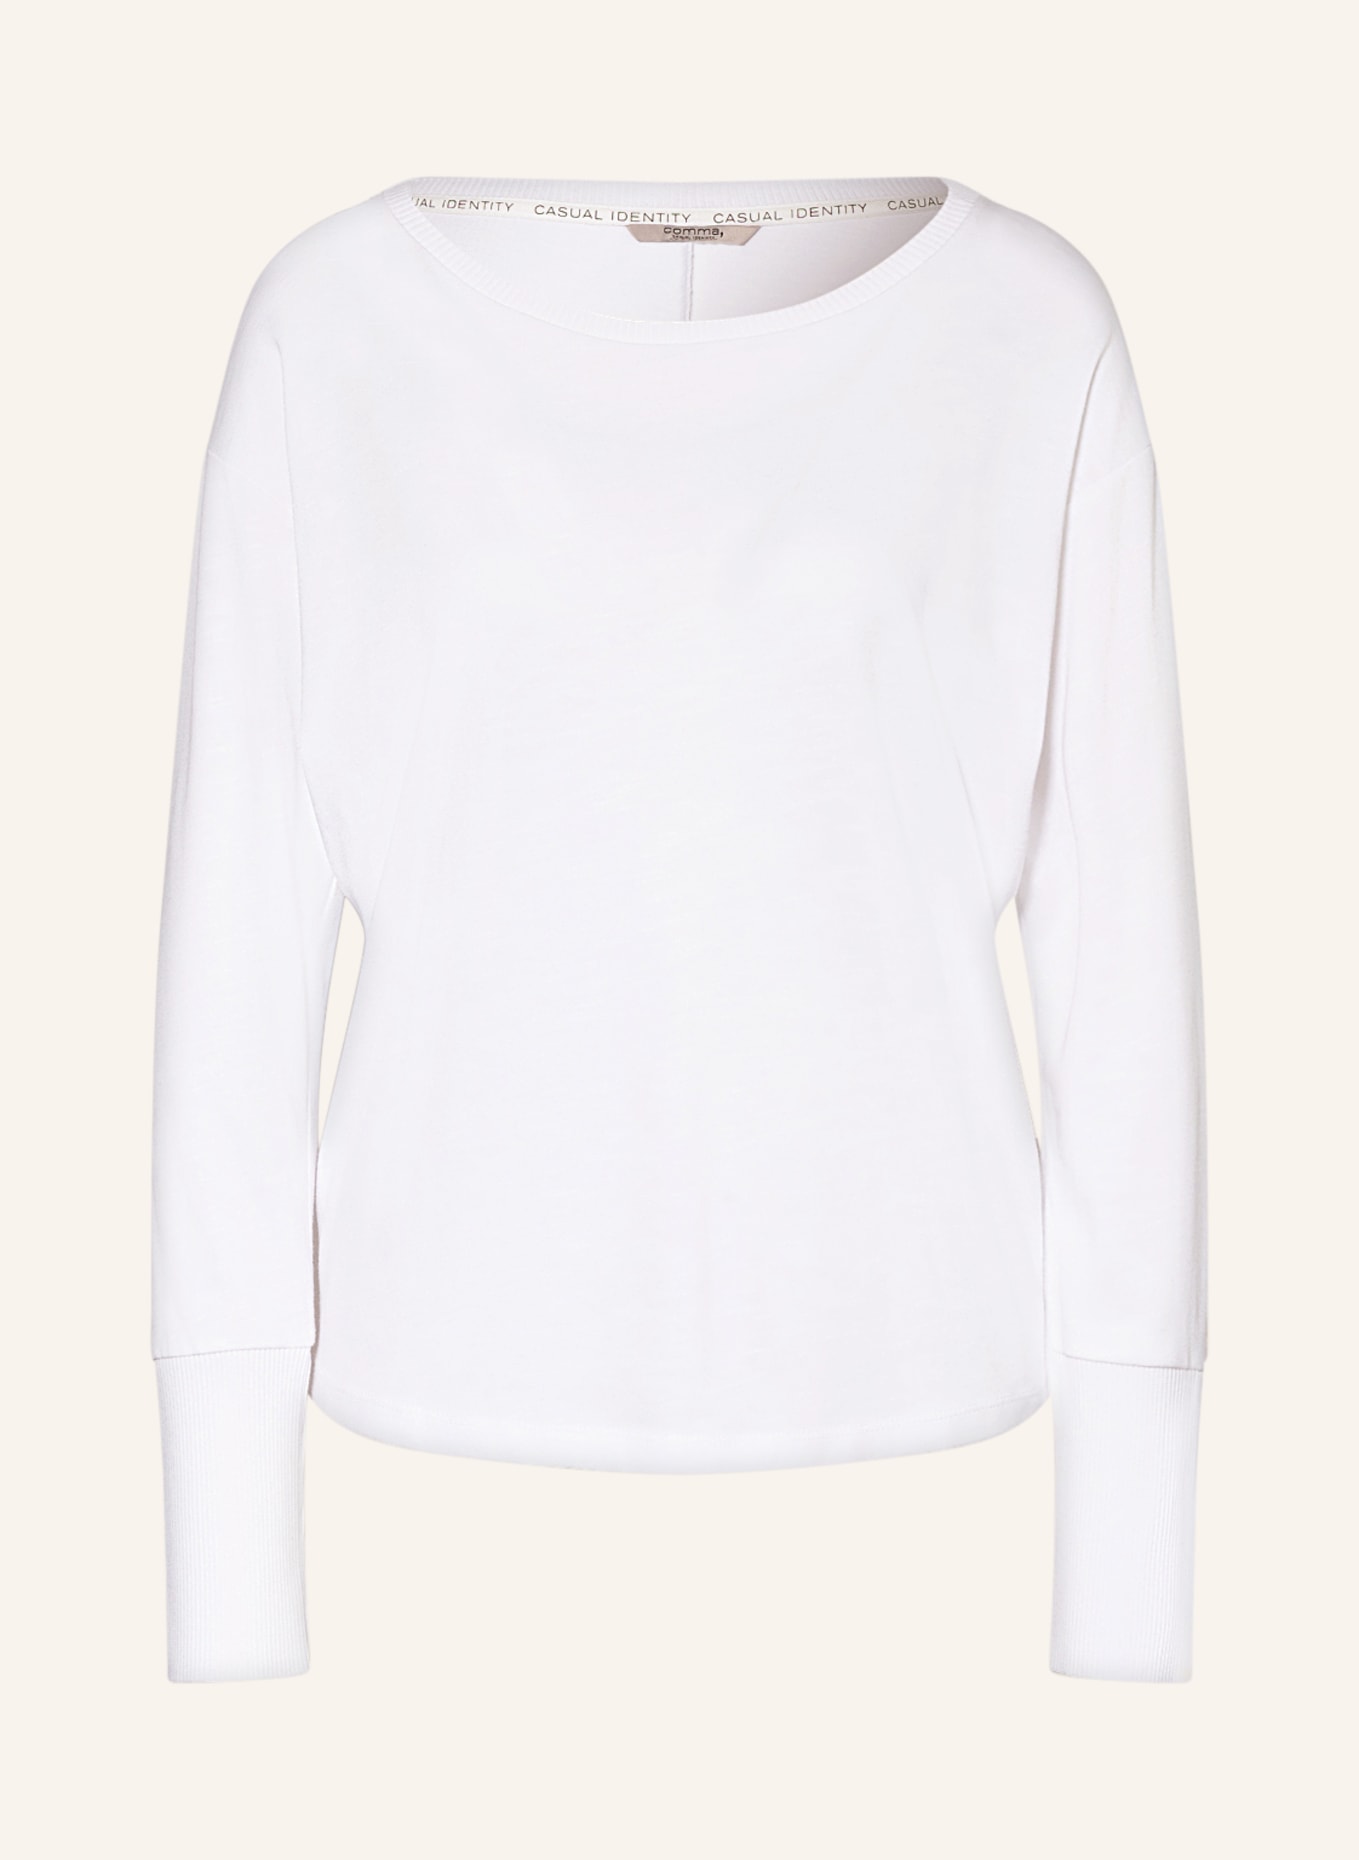 comma casual identity Long sleeve shirt, Color: WHITE (Image 1)